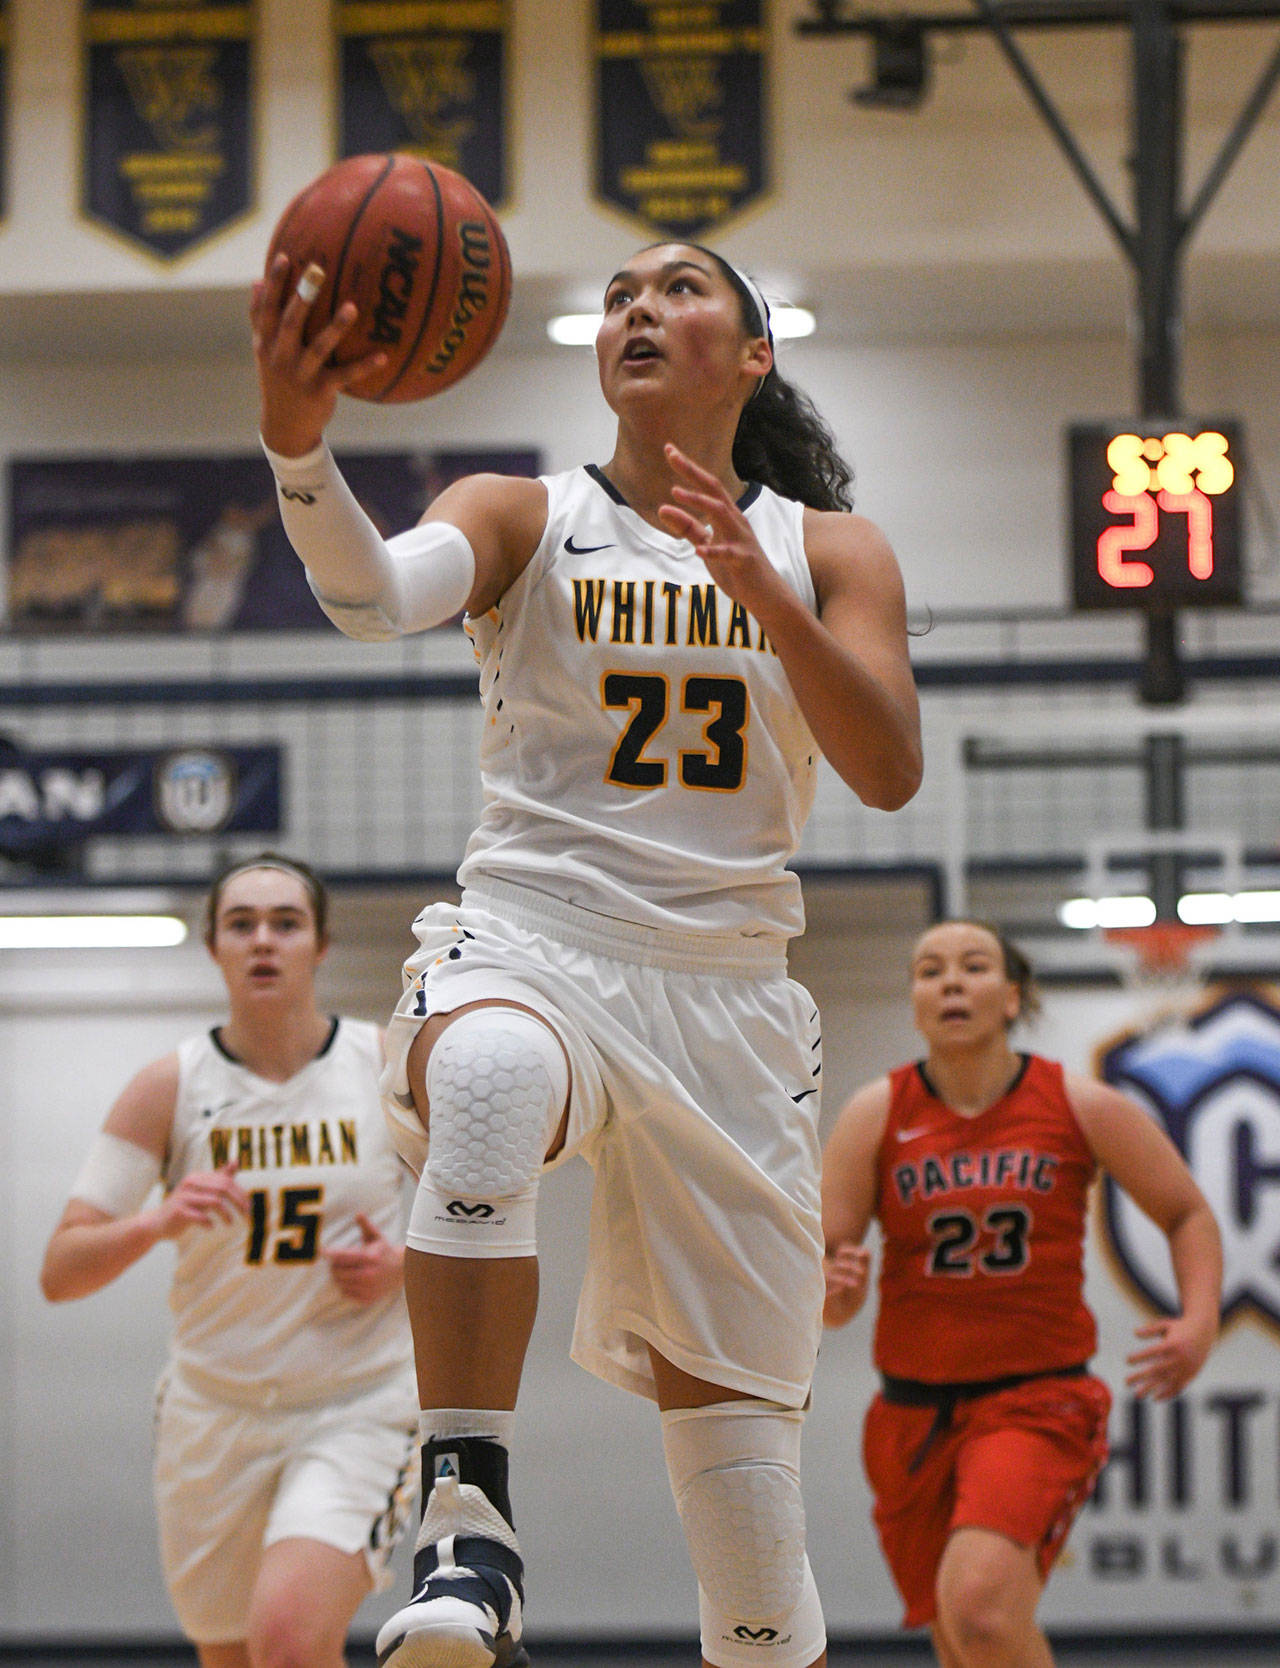 Coupeville’s Makana Stone, shown here in a game last season, broke the 1,000-point barrier for Whitman College last week. (Photo courtesy of Whitman Athletics)